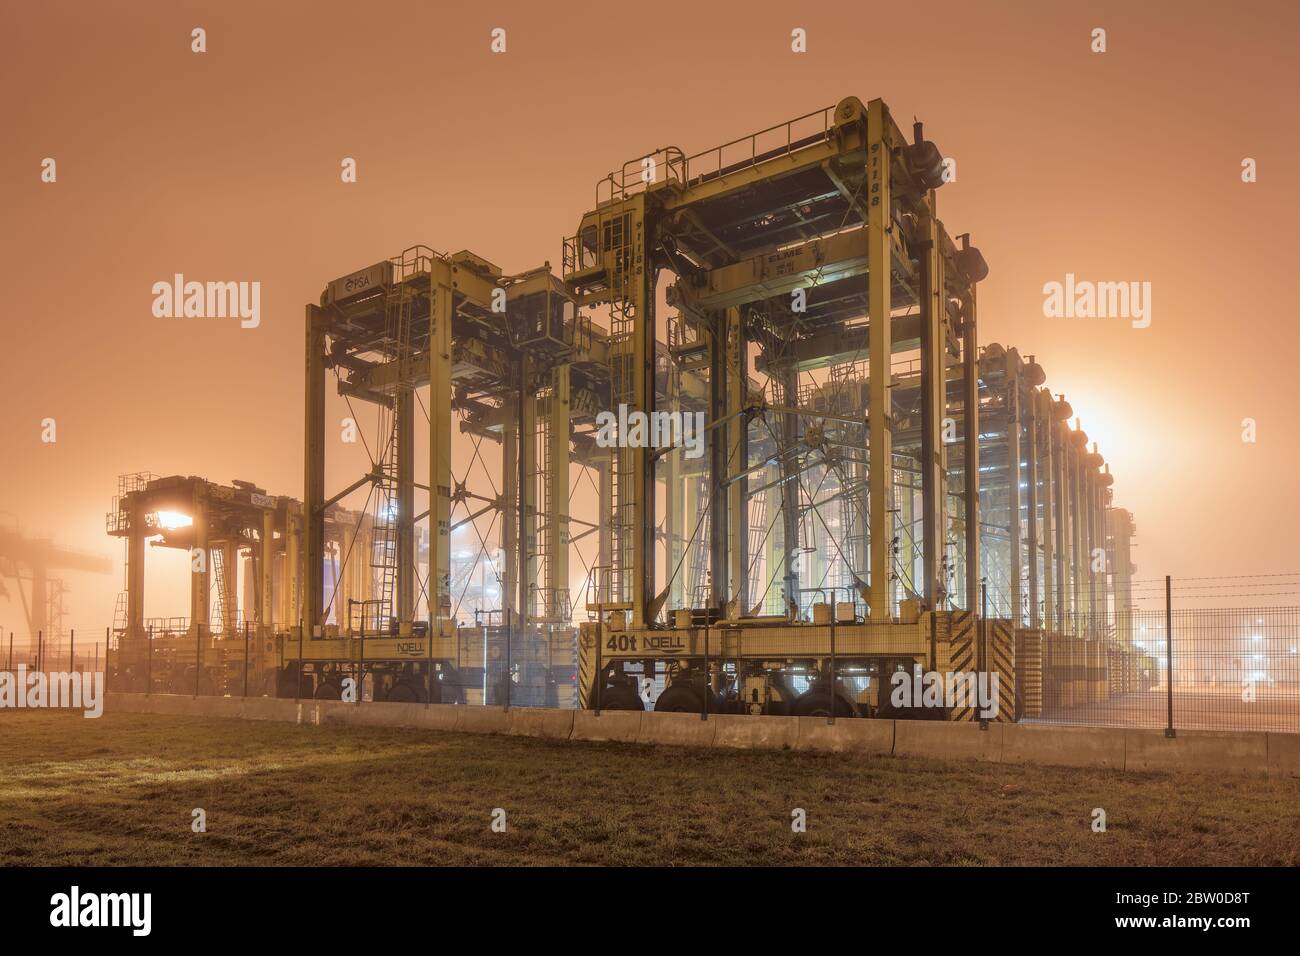 Foggy night scene with heavy equipment at container terminal, Port of Antwerp. It has a modern infrastructure, facilities and equipment. Stock Photo